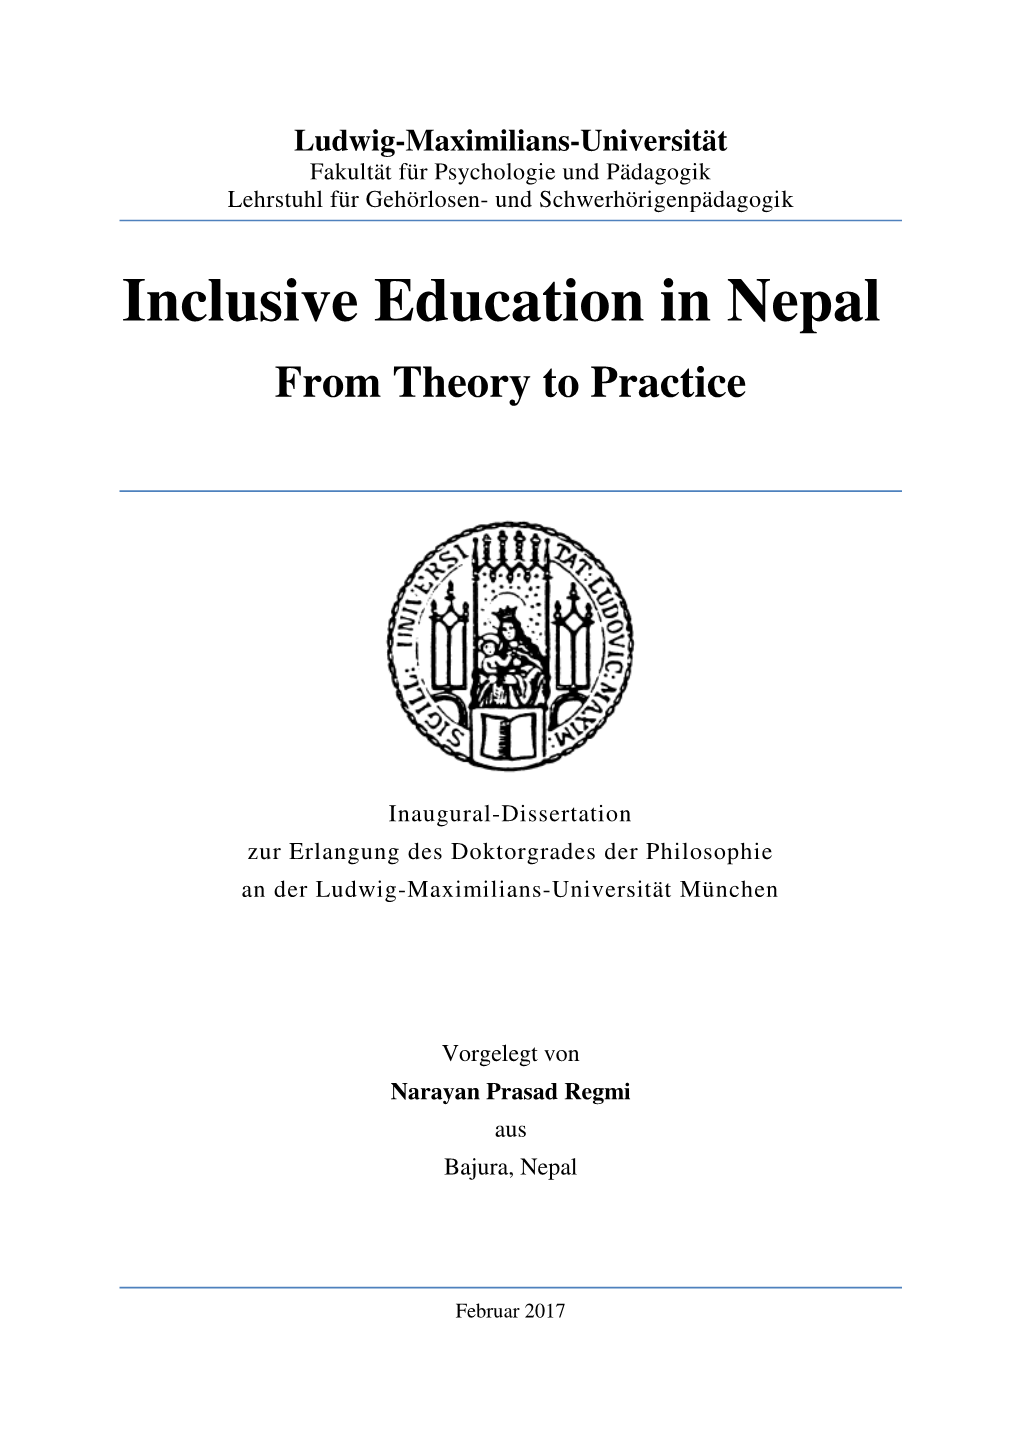 Inclusive Education in Nepal: from Theory to Practice